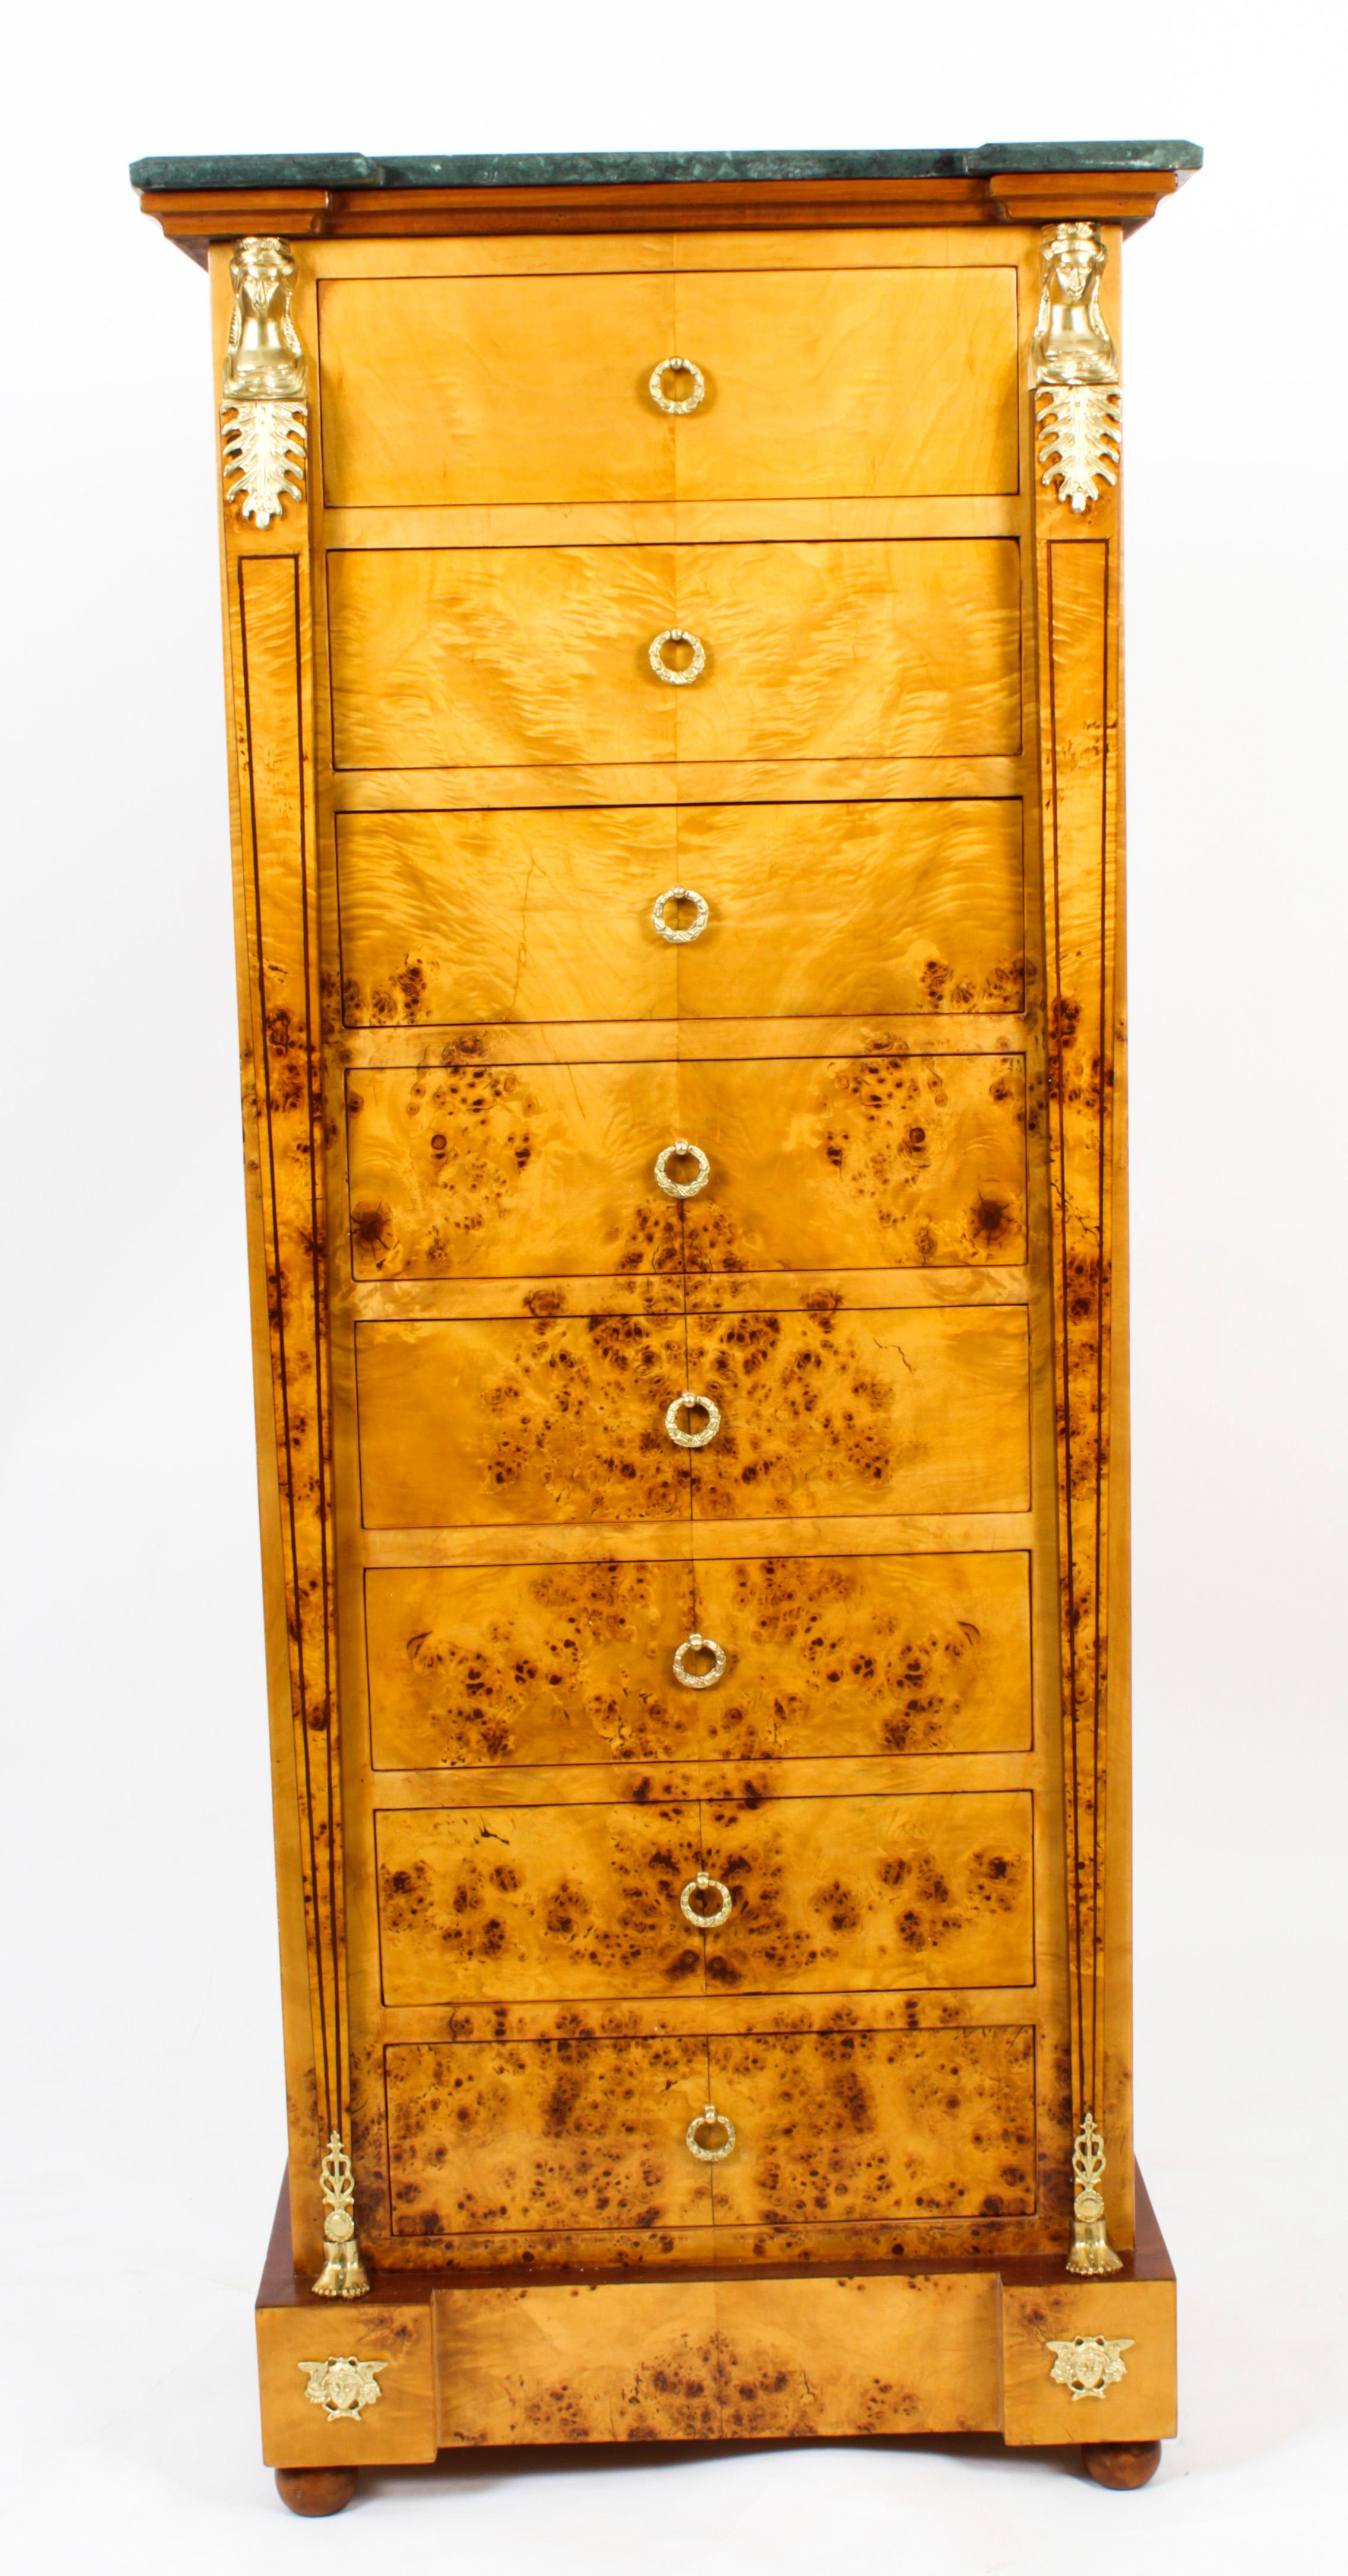 Ormolu Vintage Empire Revival Burr Maple Tall Chest 20th C For Sale